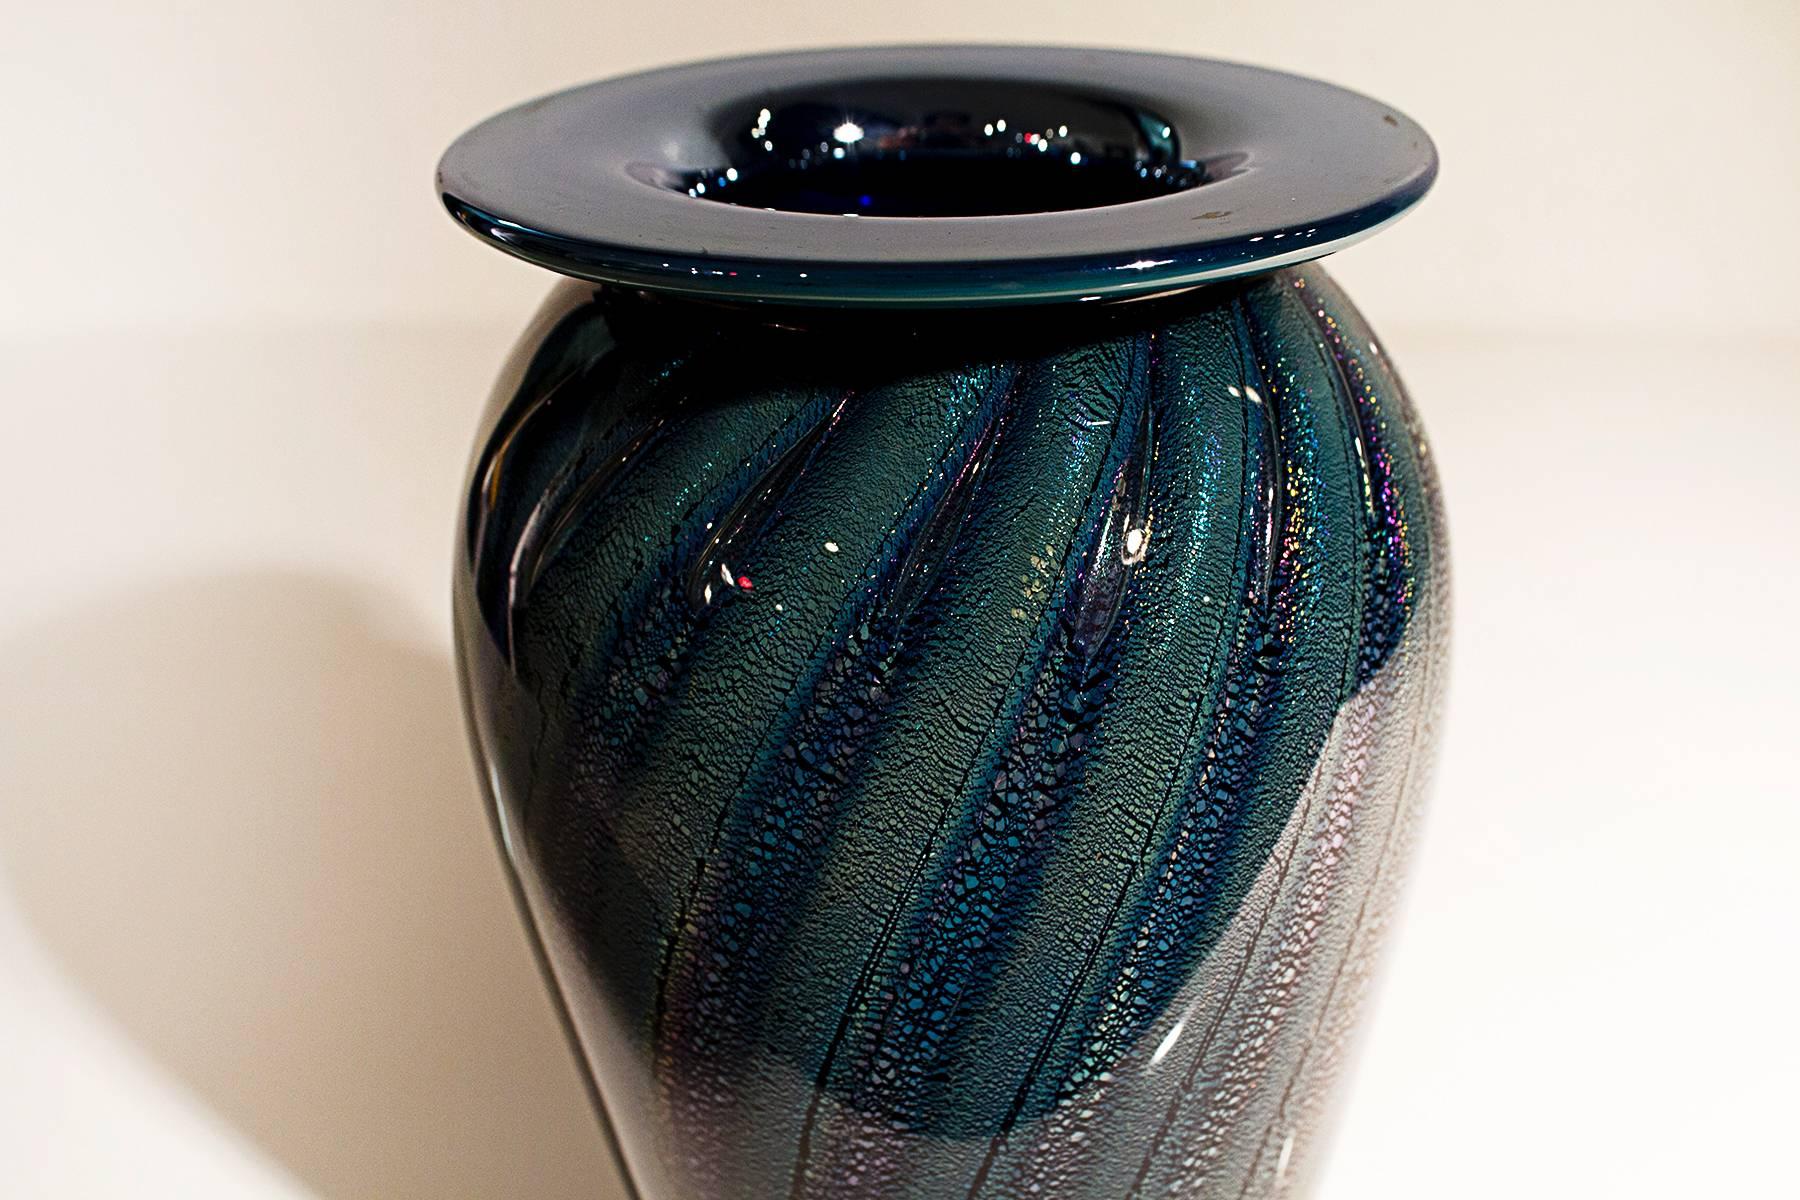 High quality Robert Eickolt iridescent greyish blue and black vase with flange rim. Twisting ribbon design with 